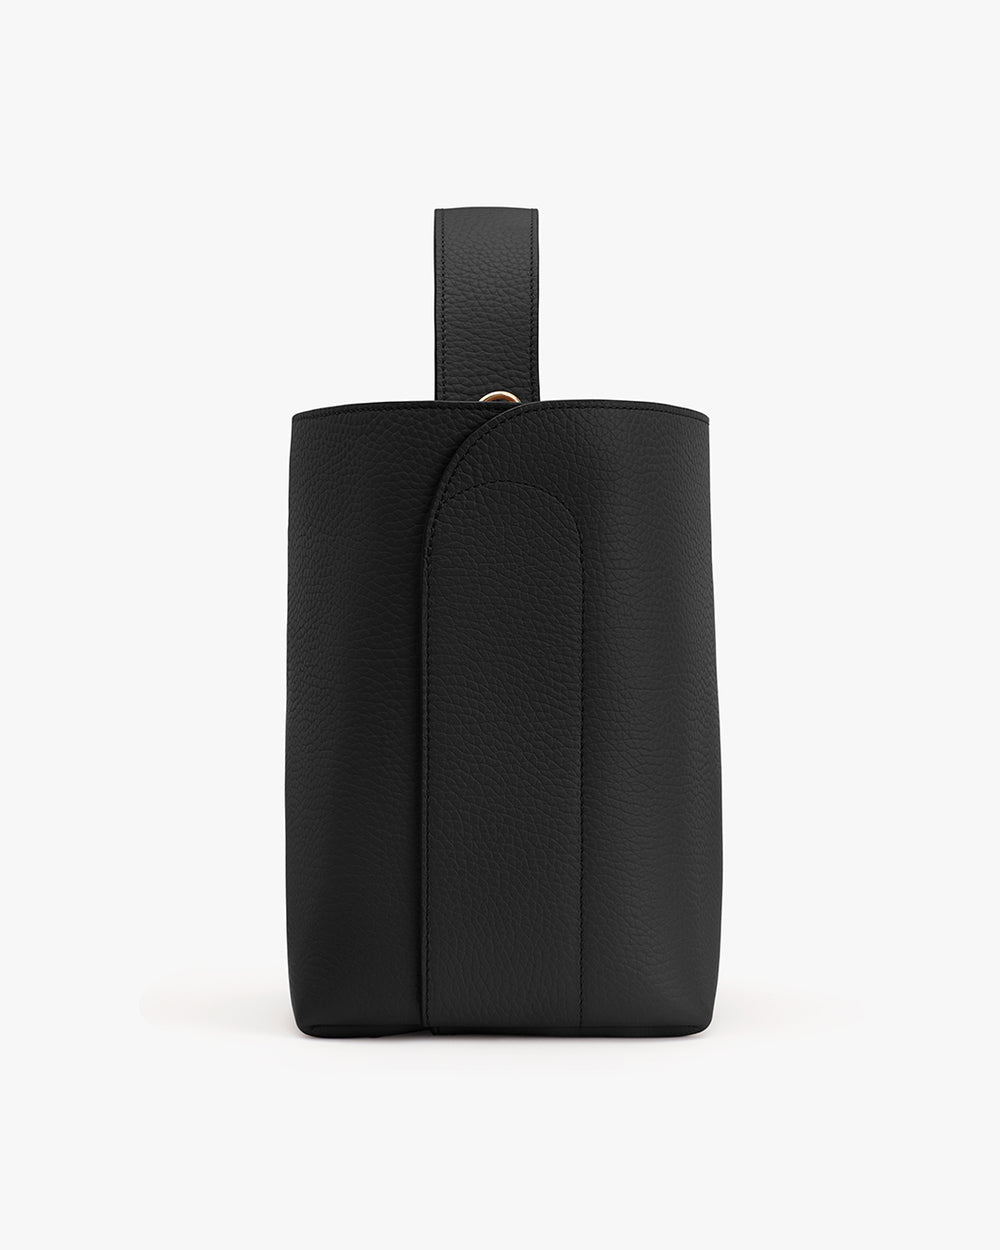 Upright cylindrical bag with a top handle and smooth texture.